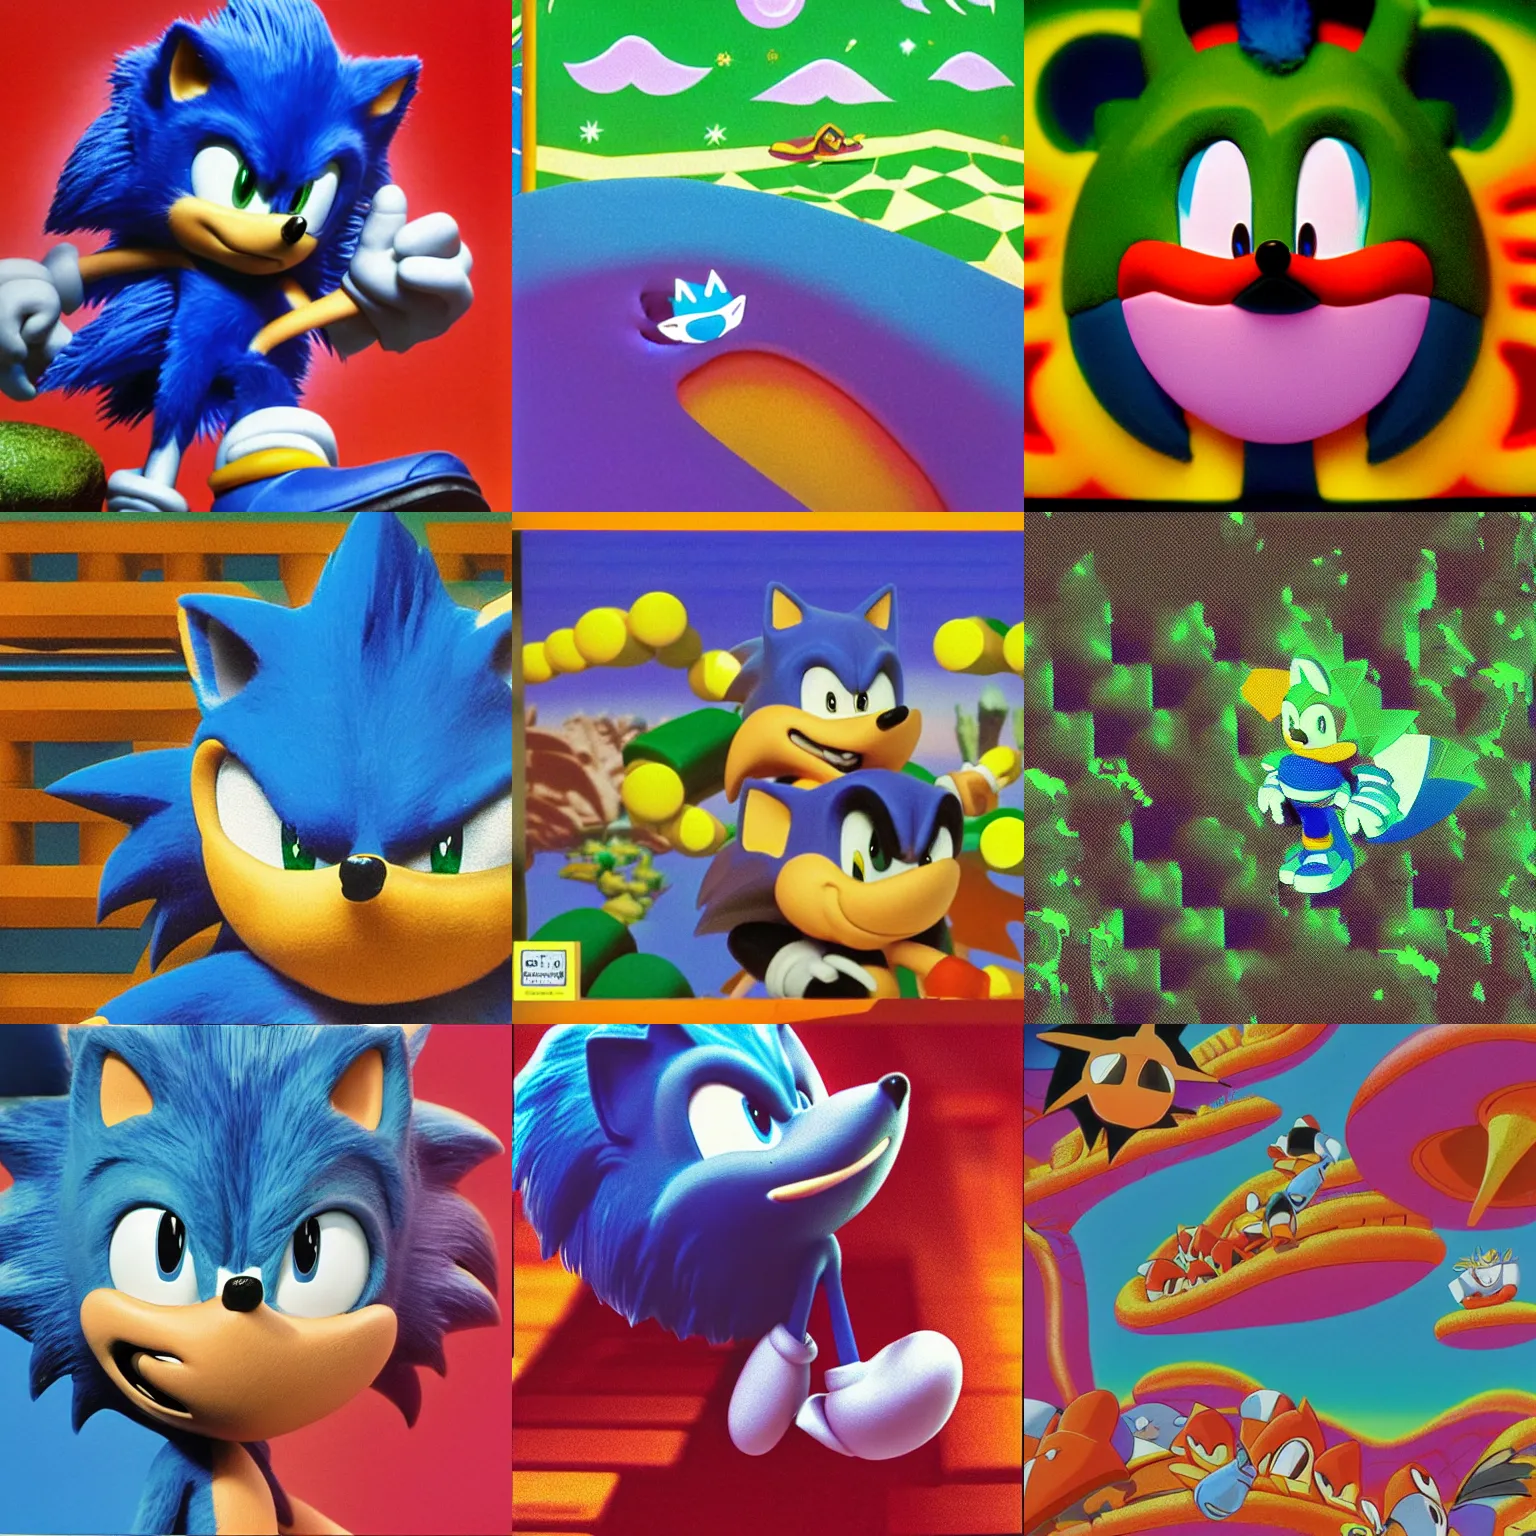 Prompt: velvia closeup sonic the hedgehog dreaming of puffy portrait colossal claymation scifi matte painting landscape of a surreal acid, sonic the hedgehog retro moulded domineering craven chubby soggy roomy noxious fluttering checkerboard background 1 9 8 0 s 1 9 8 2 sega genesis video game album cover